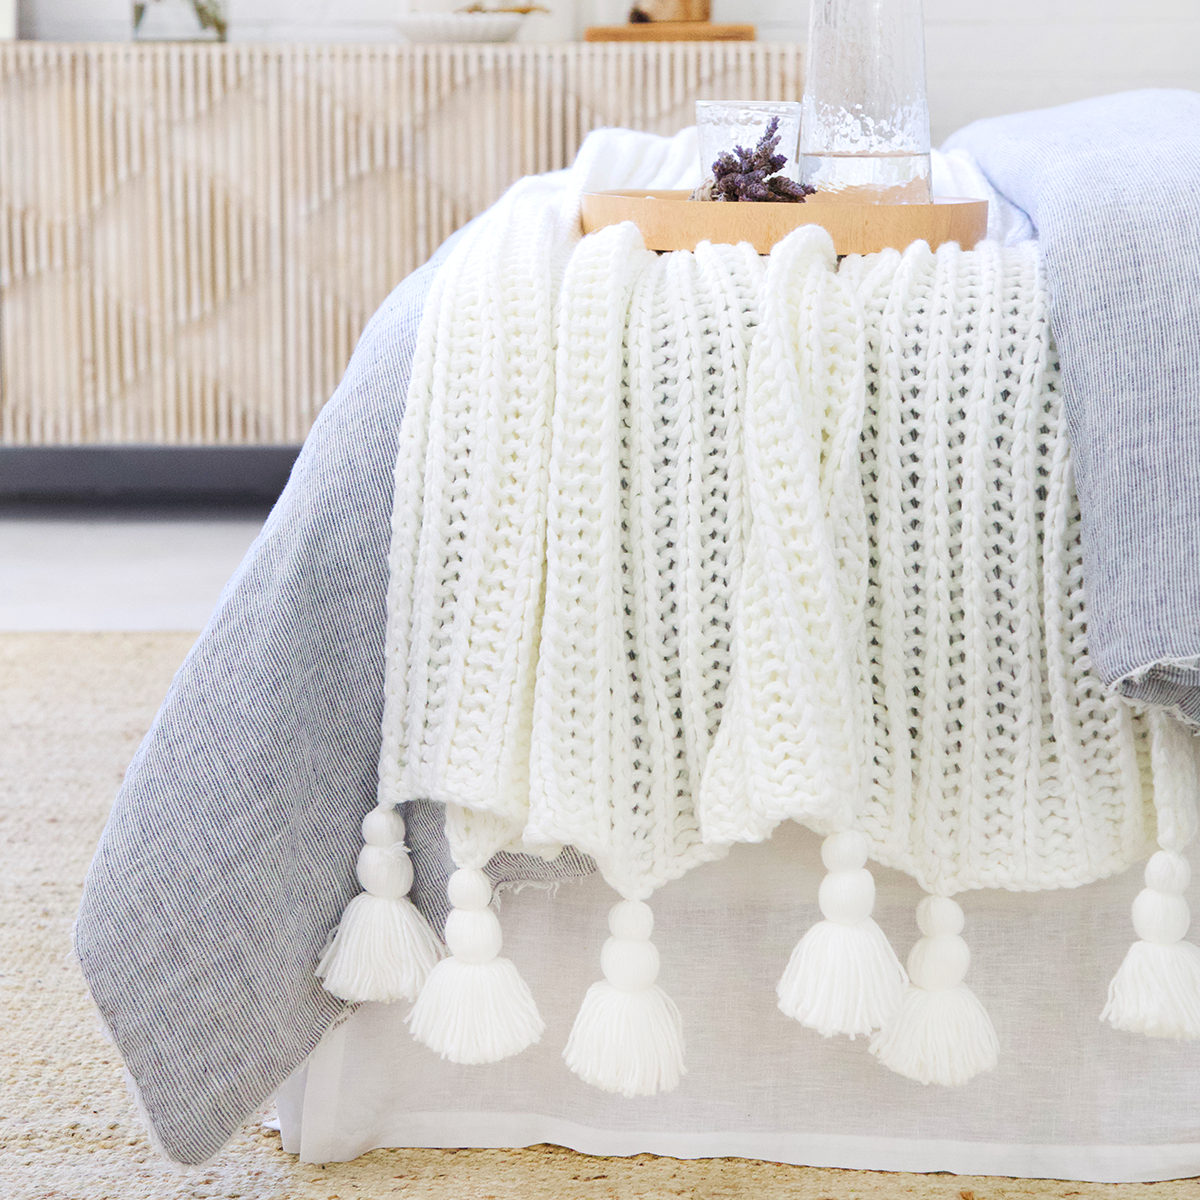 Cozy Up Your Home: Adding Pom Poms and Tassels to Blankets and